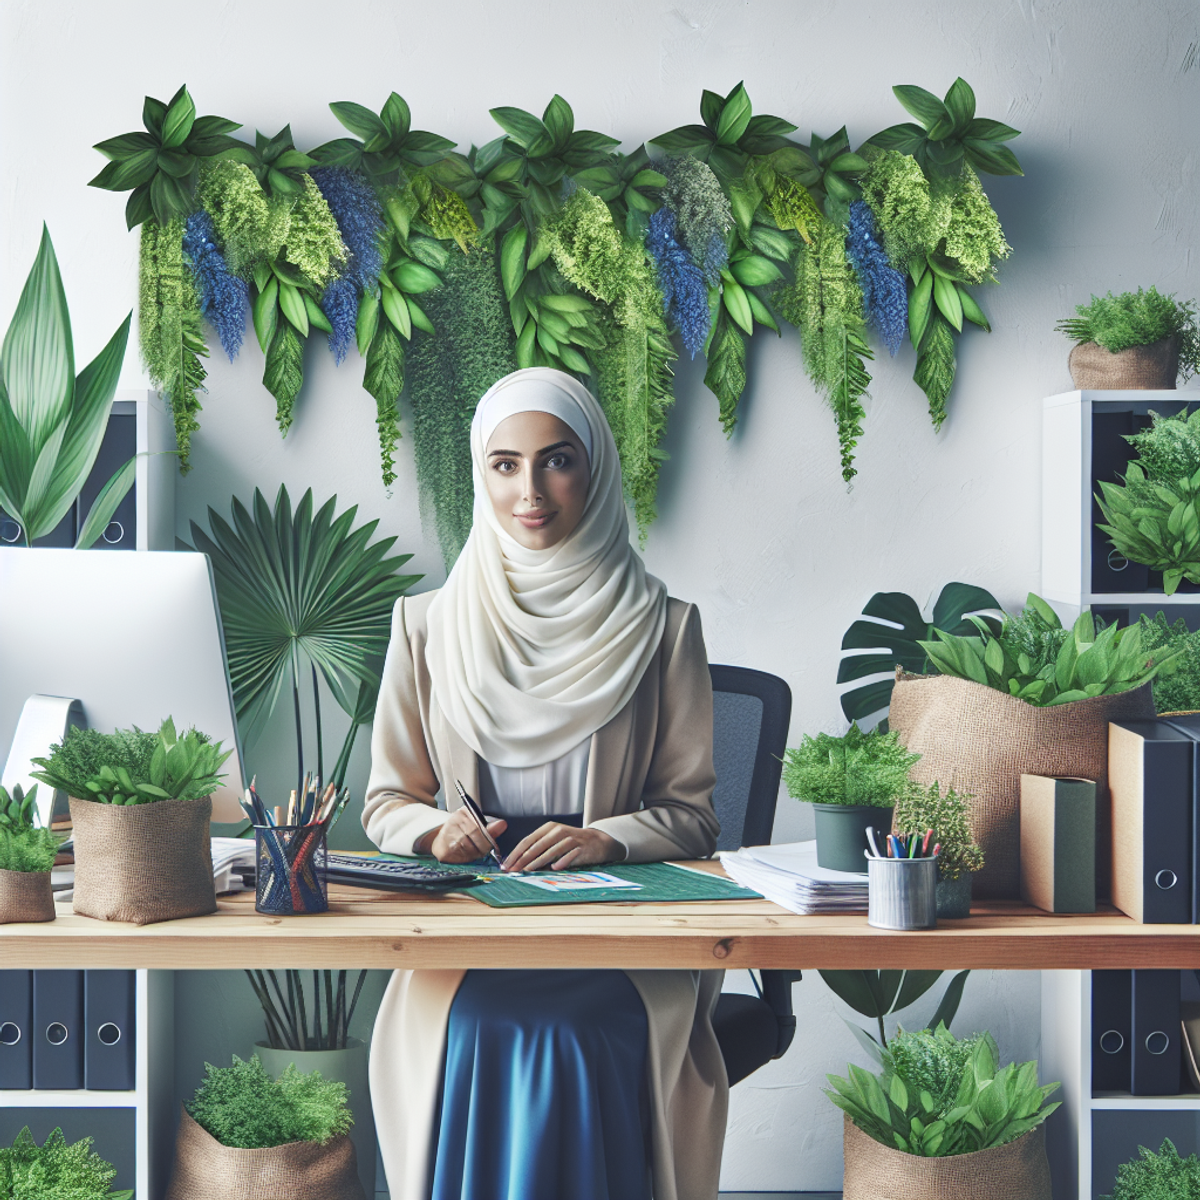 A woman sits at a desk surrounded by lush green plants, working with a focused and positive expression.